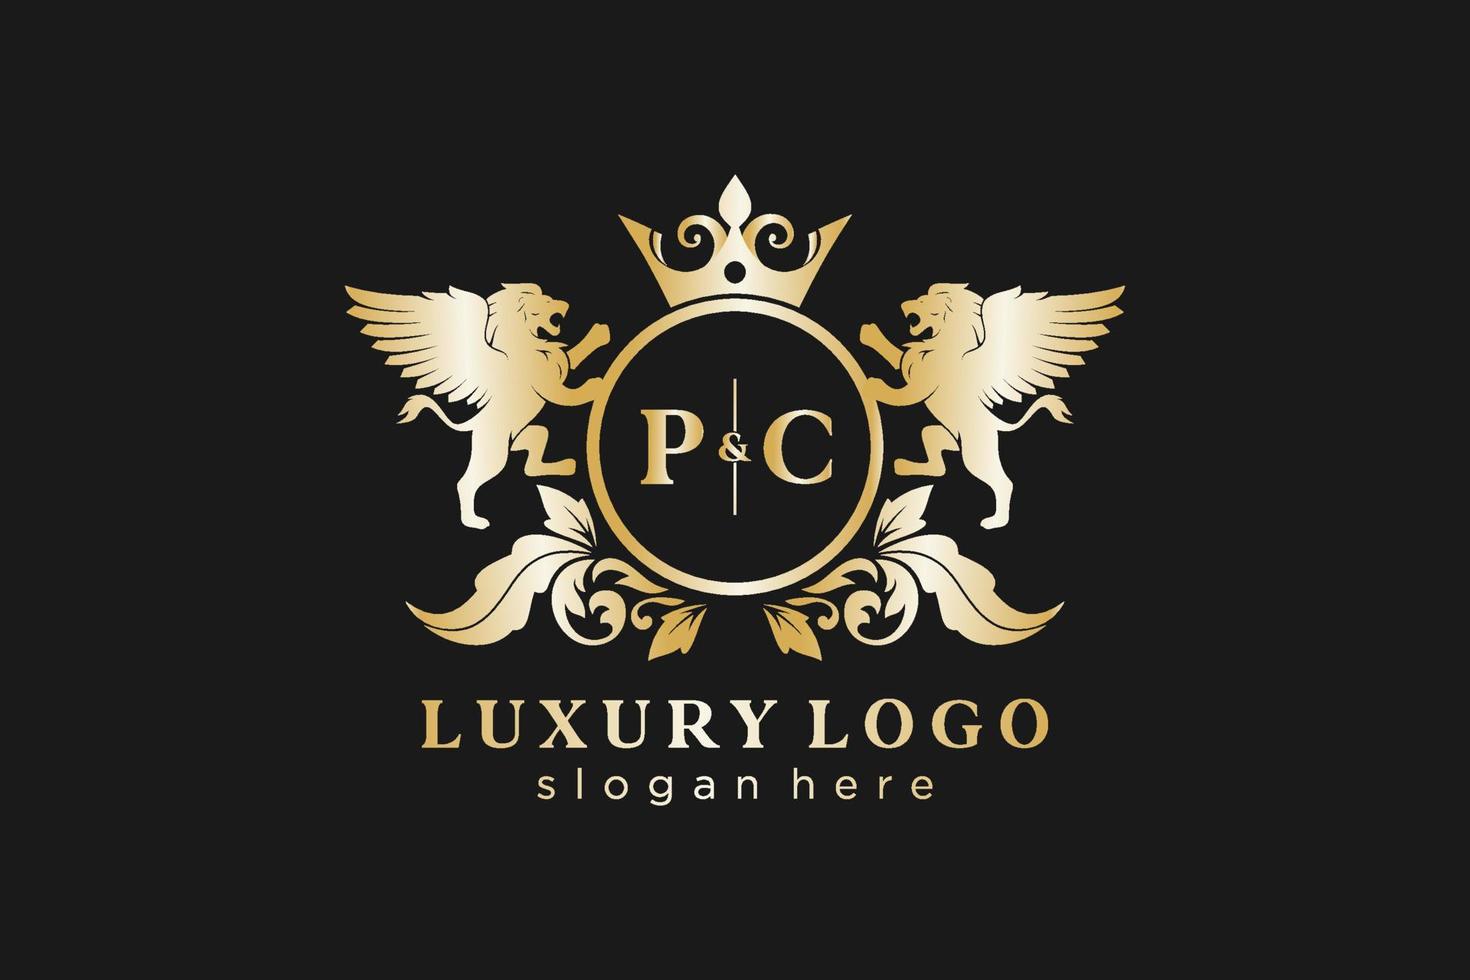 Initial PC Letter Lion Royal Luxury Logo template in vector art for Restaurant, Royalty, Boutique, Cafe, Hotel, Heraldic, Jewelry, Fashion and other vector illustration.